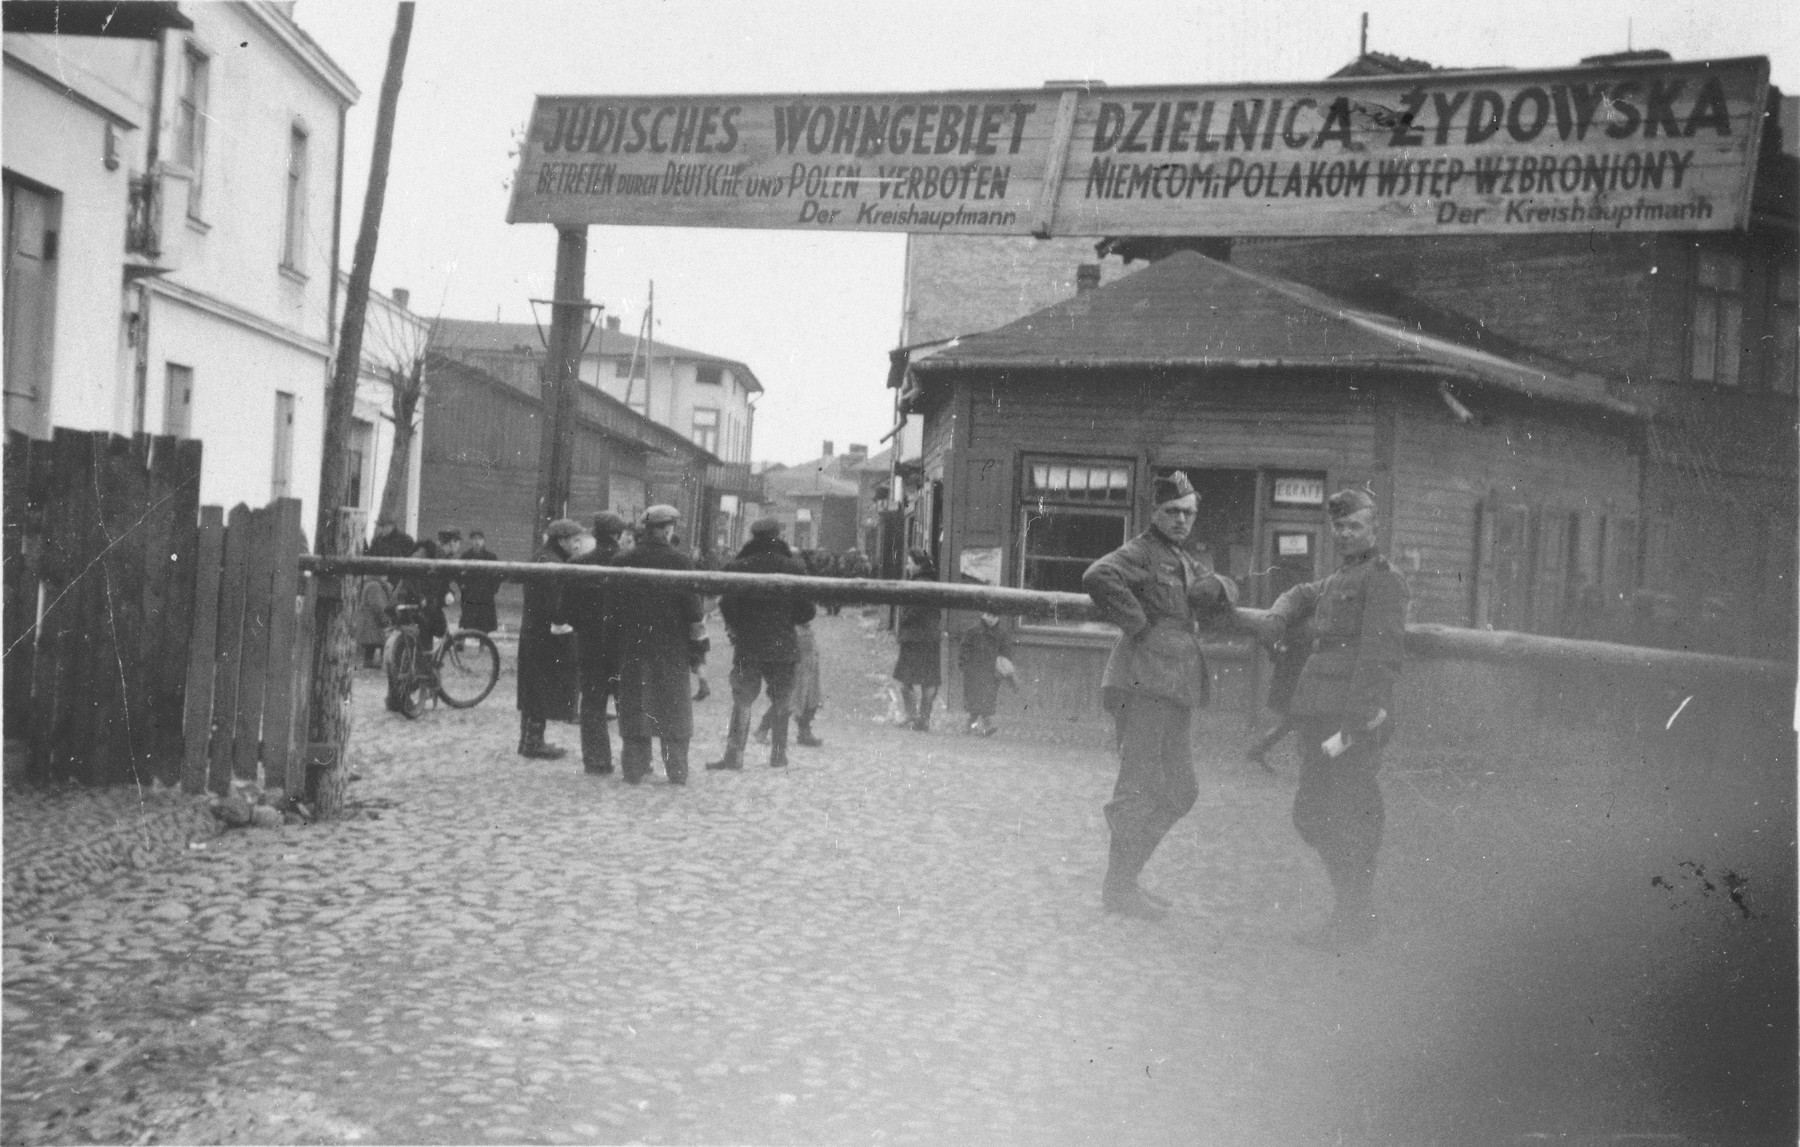 Two German soldiers stand at the entrance to the Otwock ghetto at  ul. Andriollego Michala.

The sign in Polish and German states that entrance to the Jewish quarter is forbidden to Germans and Poles.